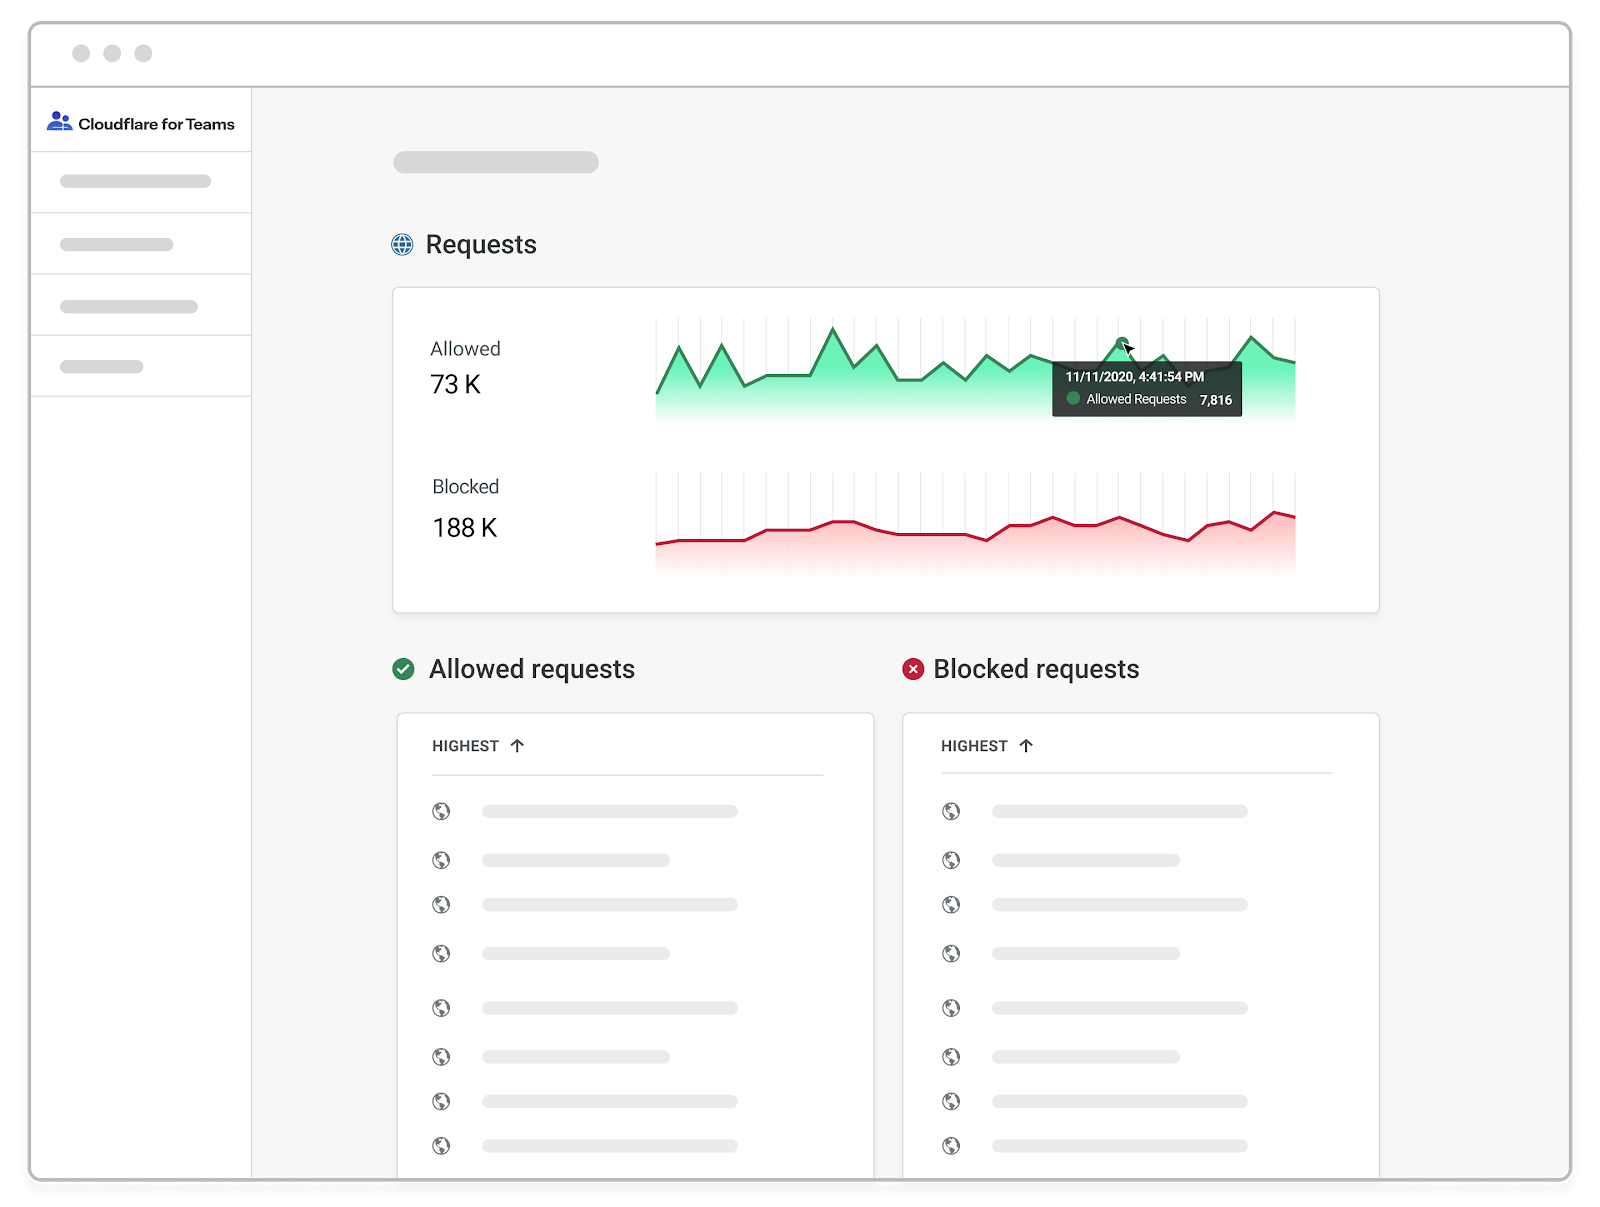 A single dashboard for Cloudflare for Teams